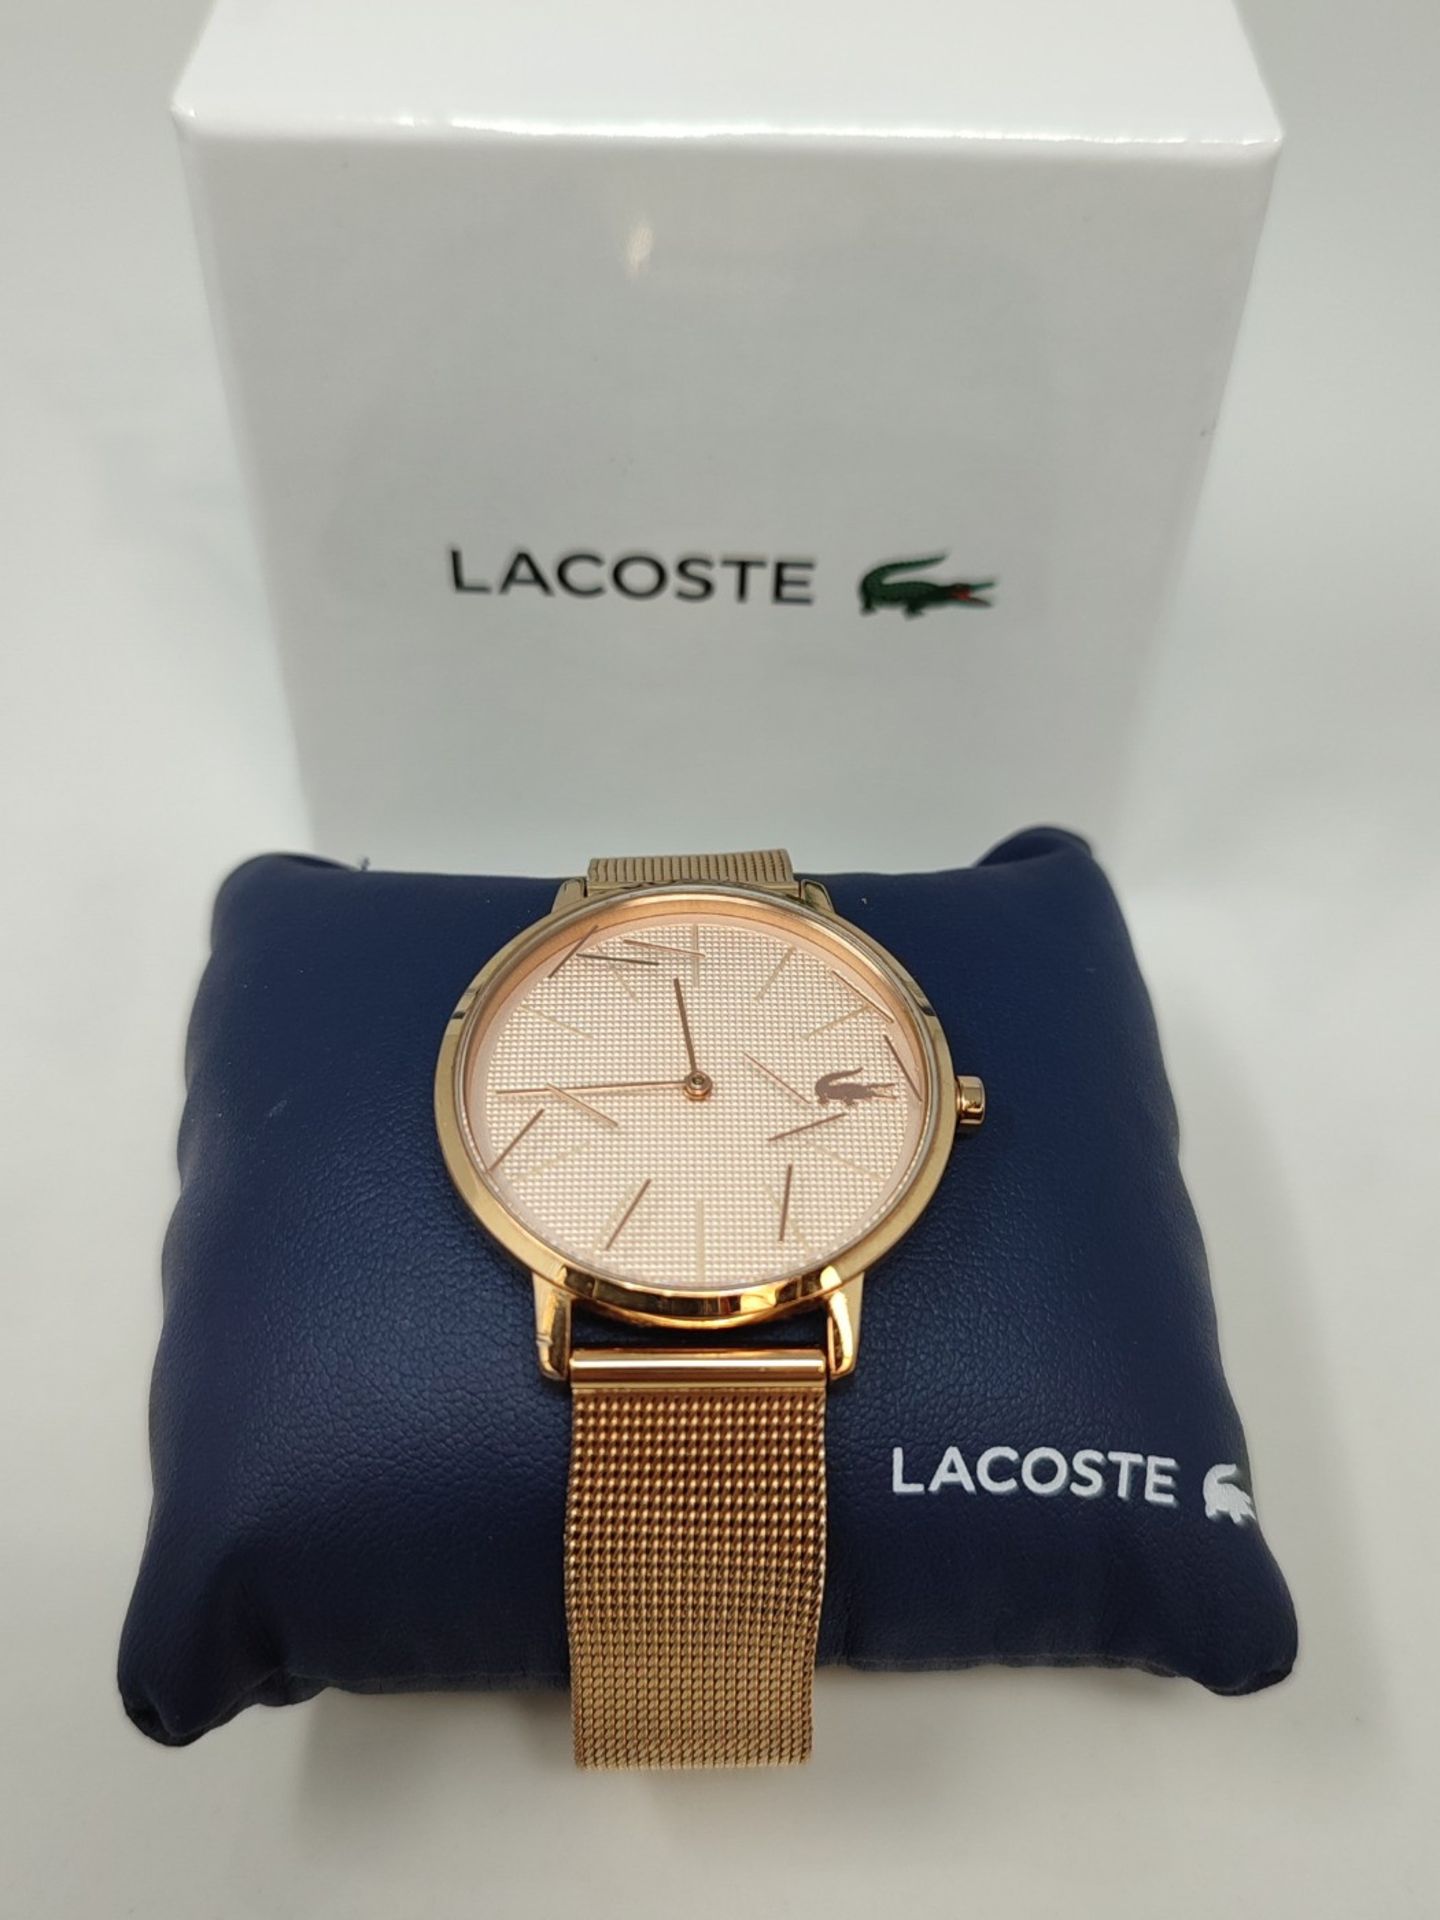 RRP £138.00 Lacoste Women's Quartz Analog Watch with Rose Gold Milanese Stainless Steel Bracelet - - Image 2 of 3